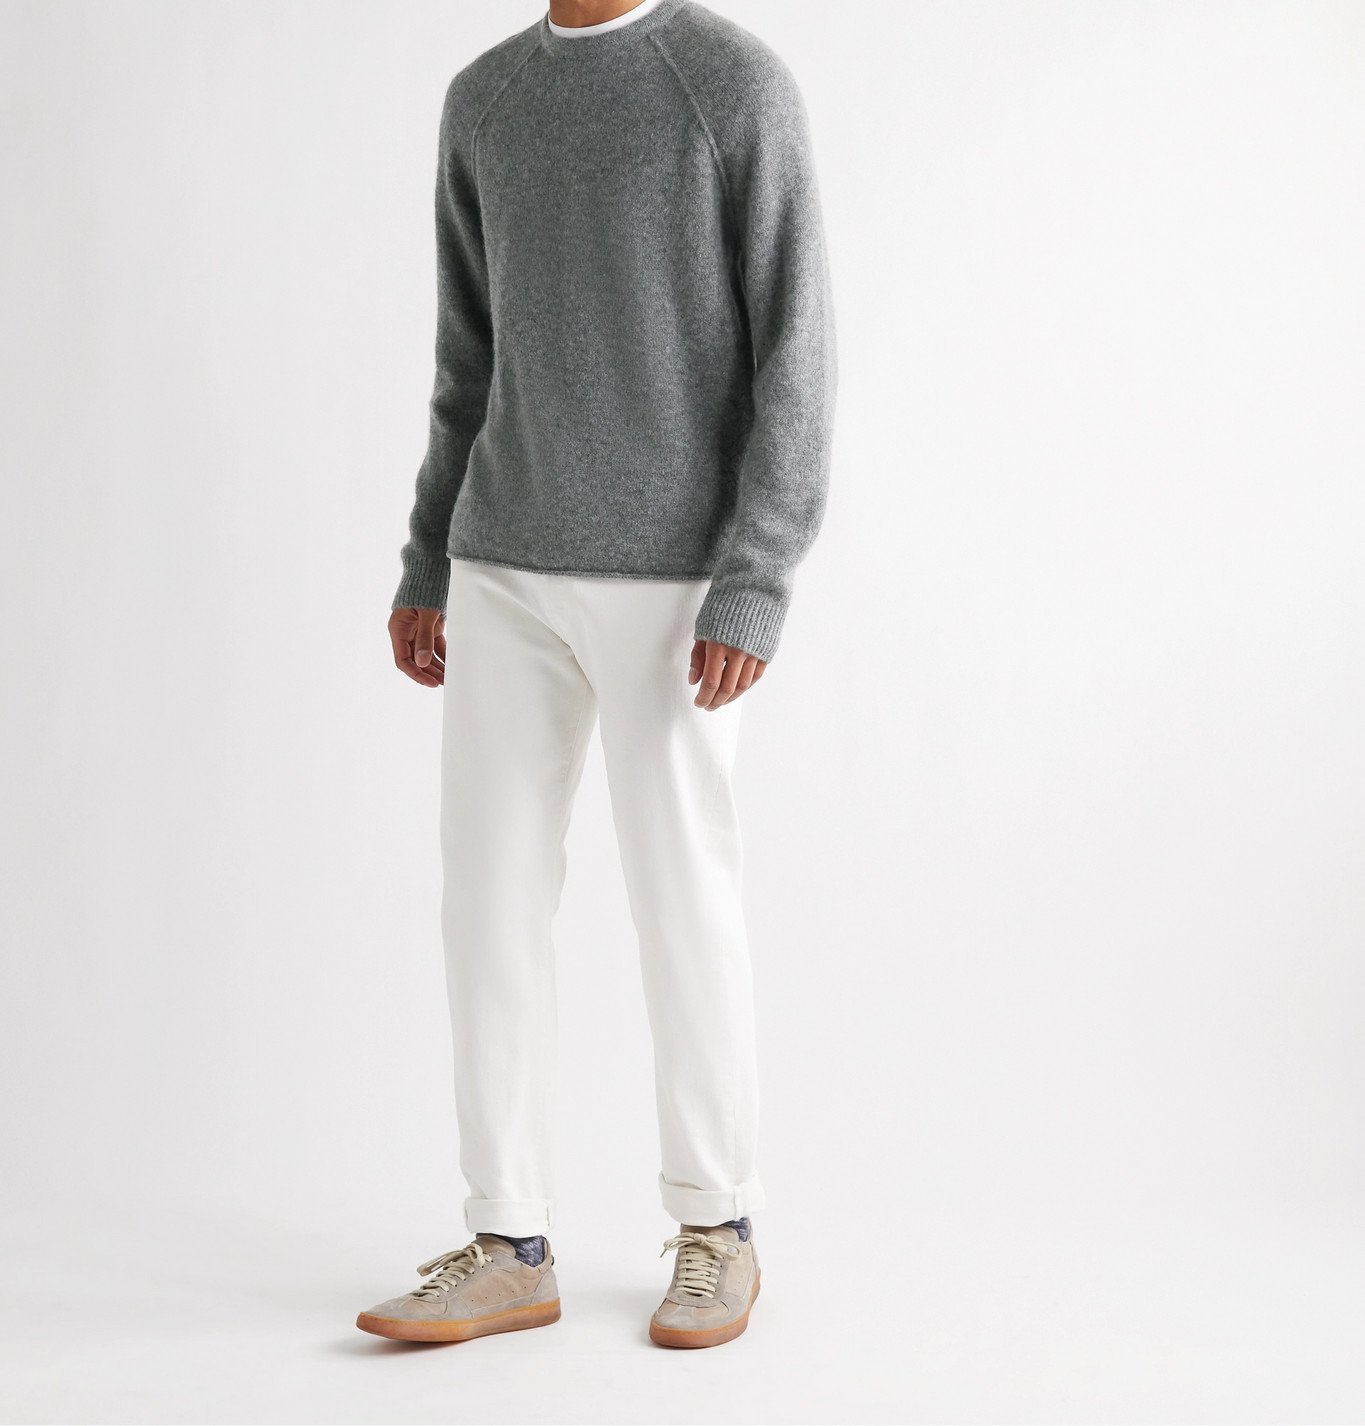 James Perse - Cashmere Sweater - Gray James Perse